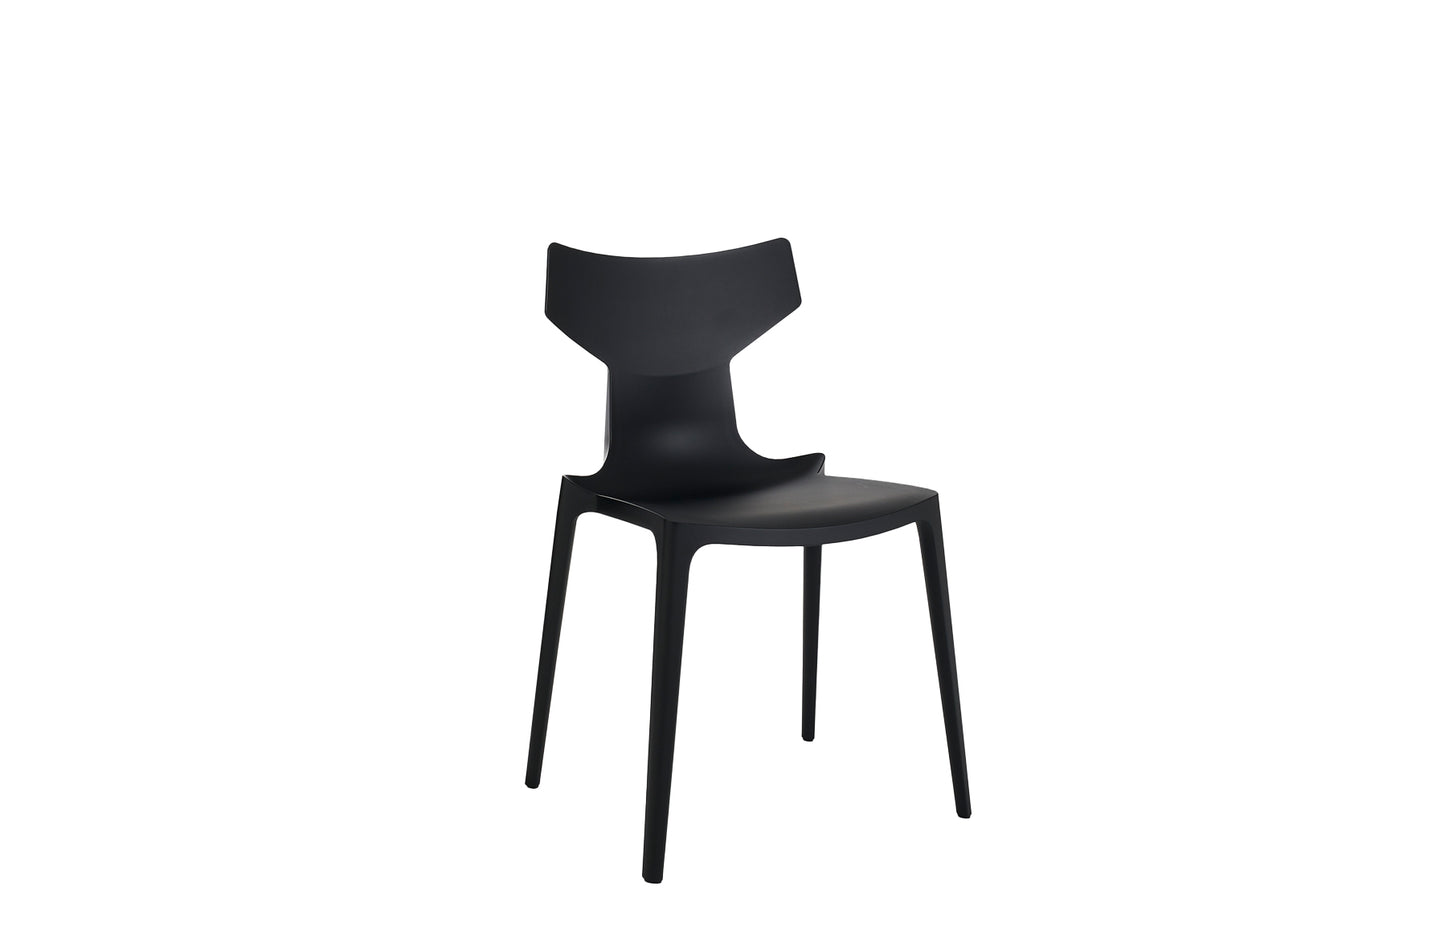 Re-Chair powered by Illy
